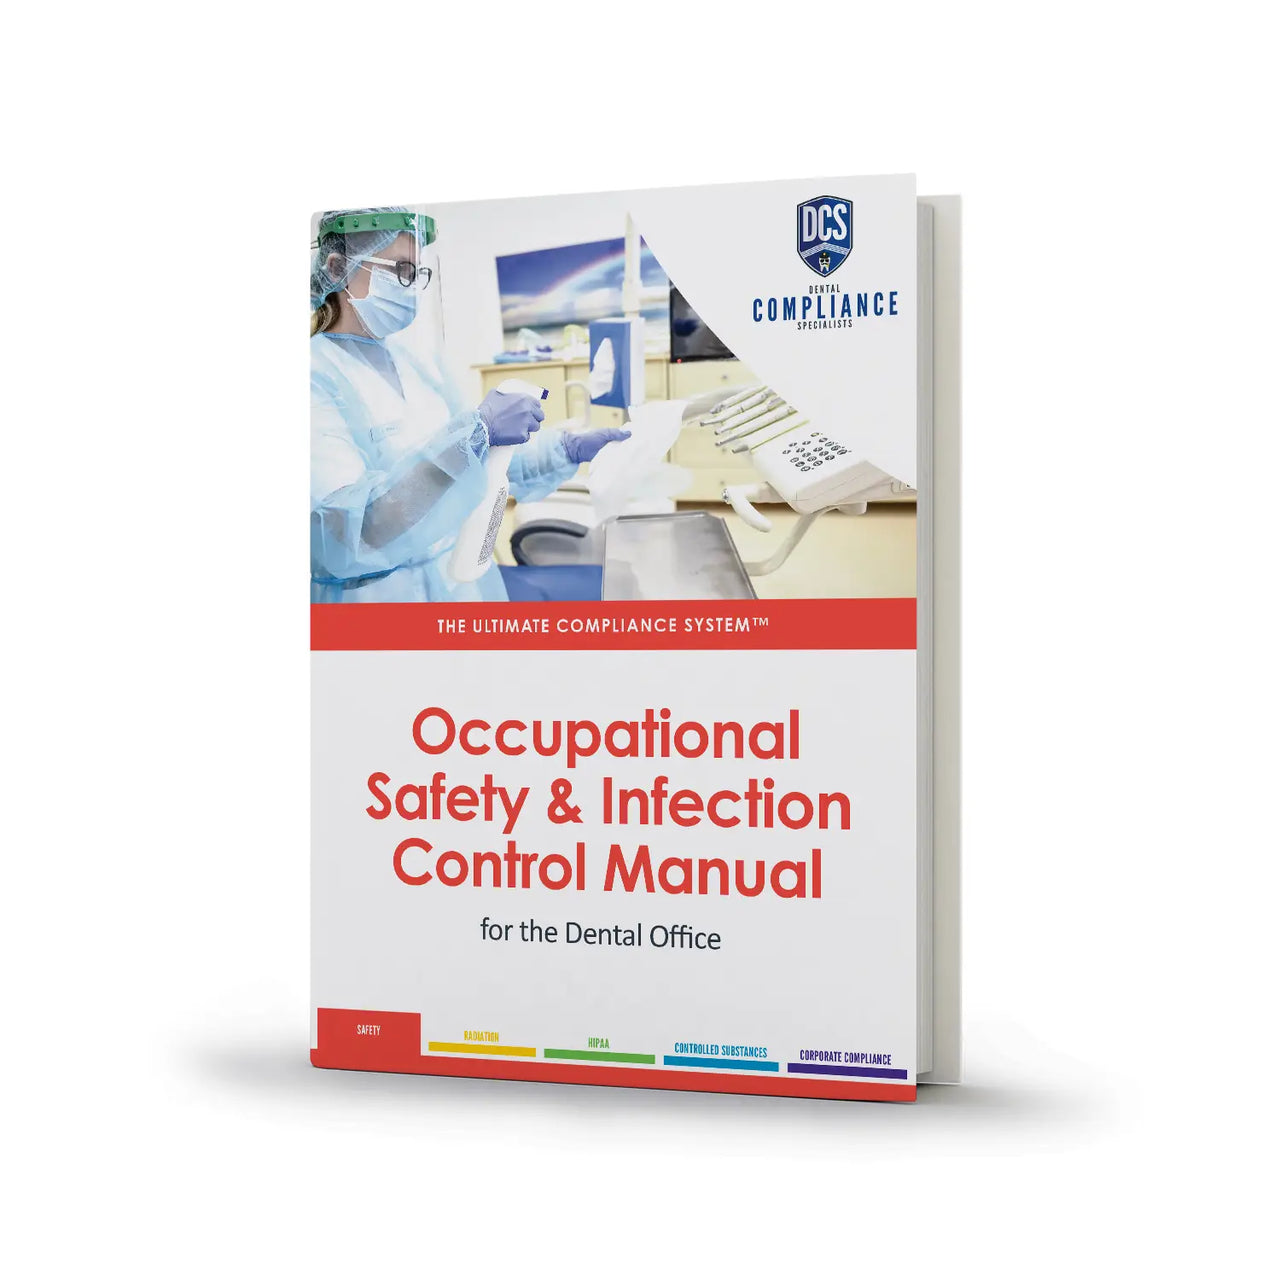 OSHA Safety Compliance & Infection Control Manual